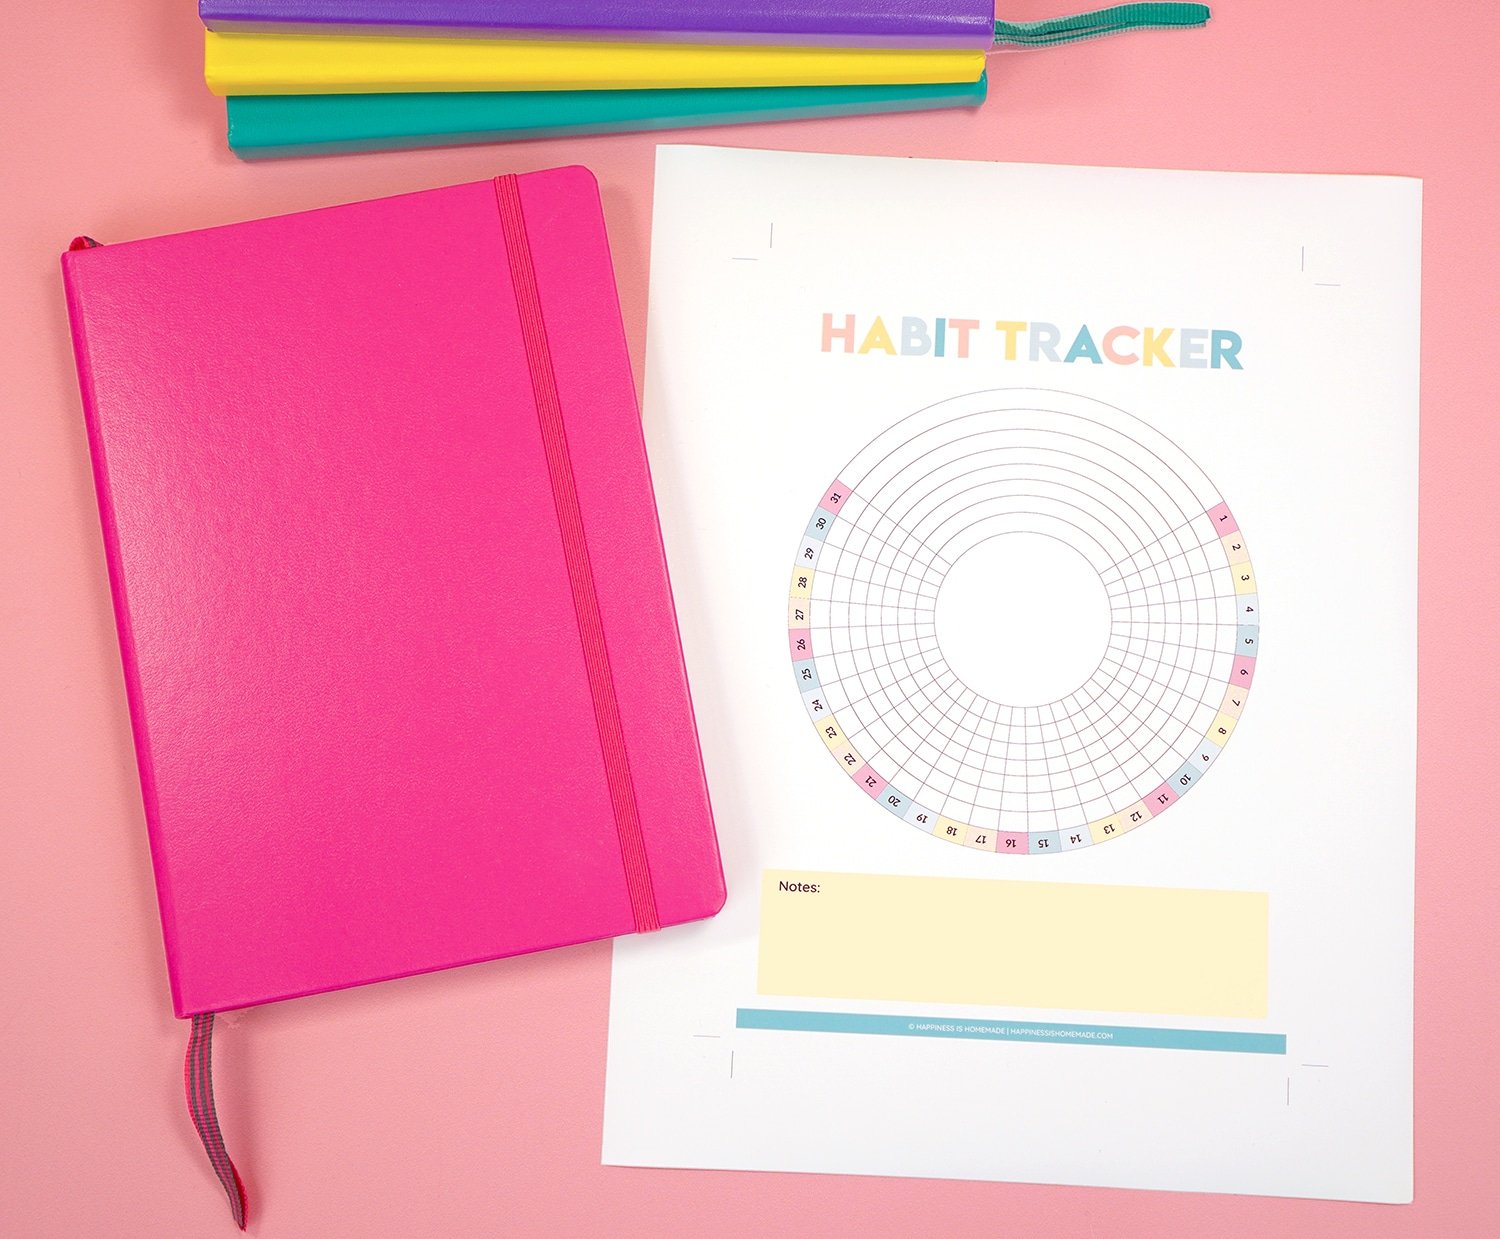 Printable Habit Tracker and bright pink bullet journal on light pink background